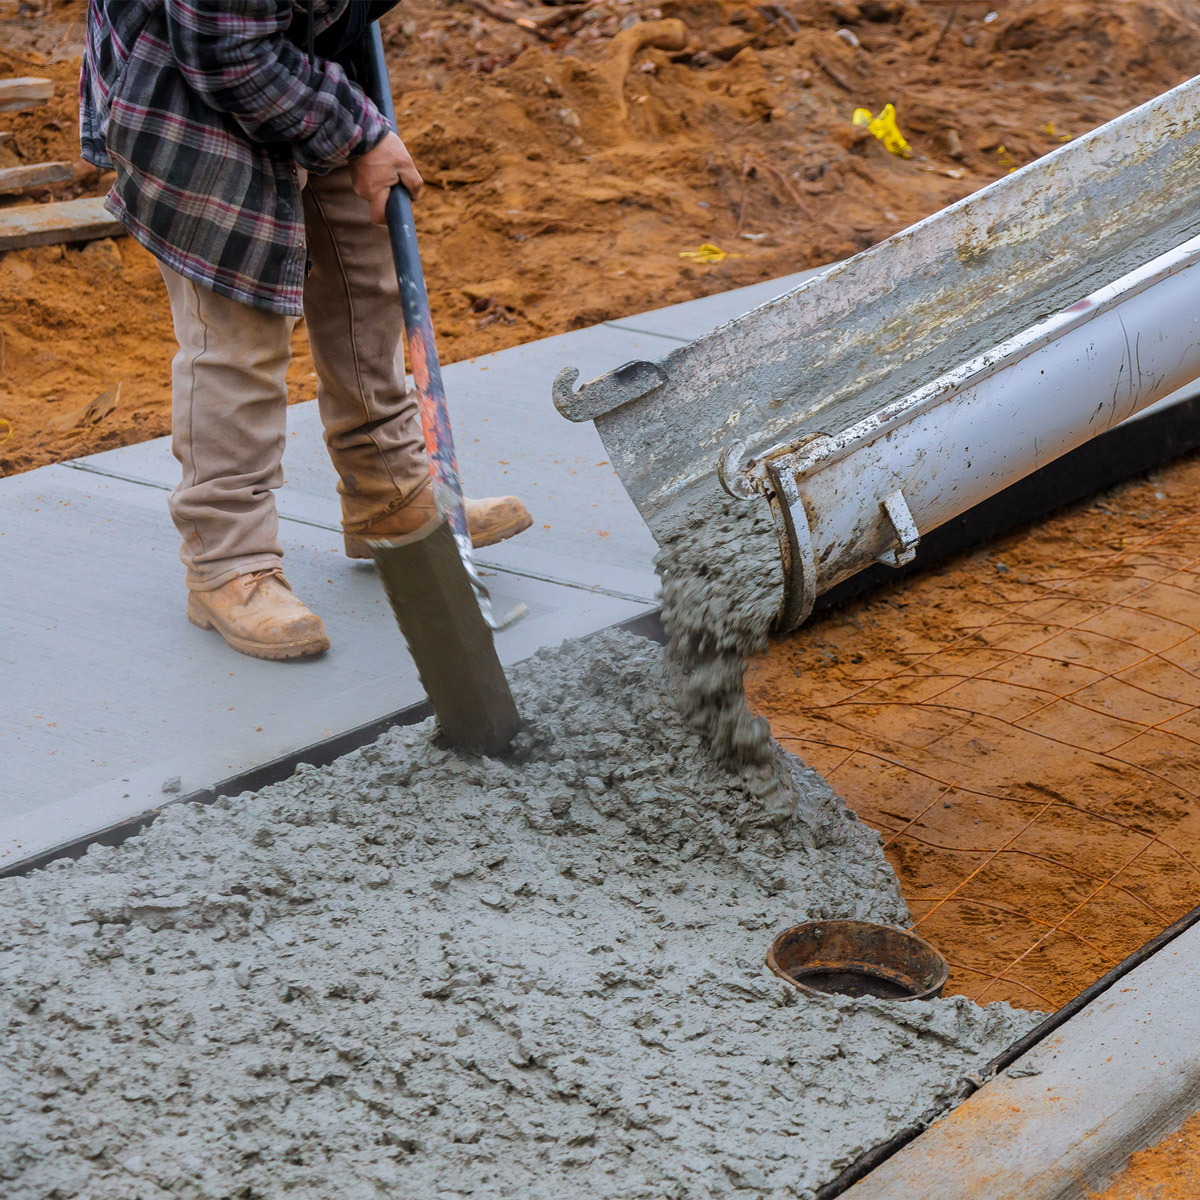 concrete delivered by tkm materials being poured at construction site